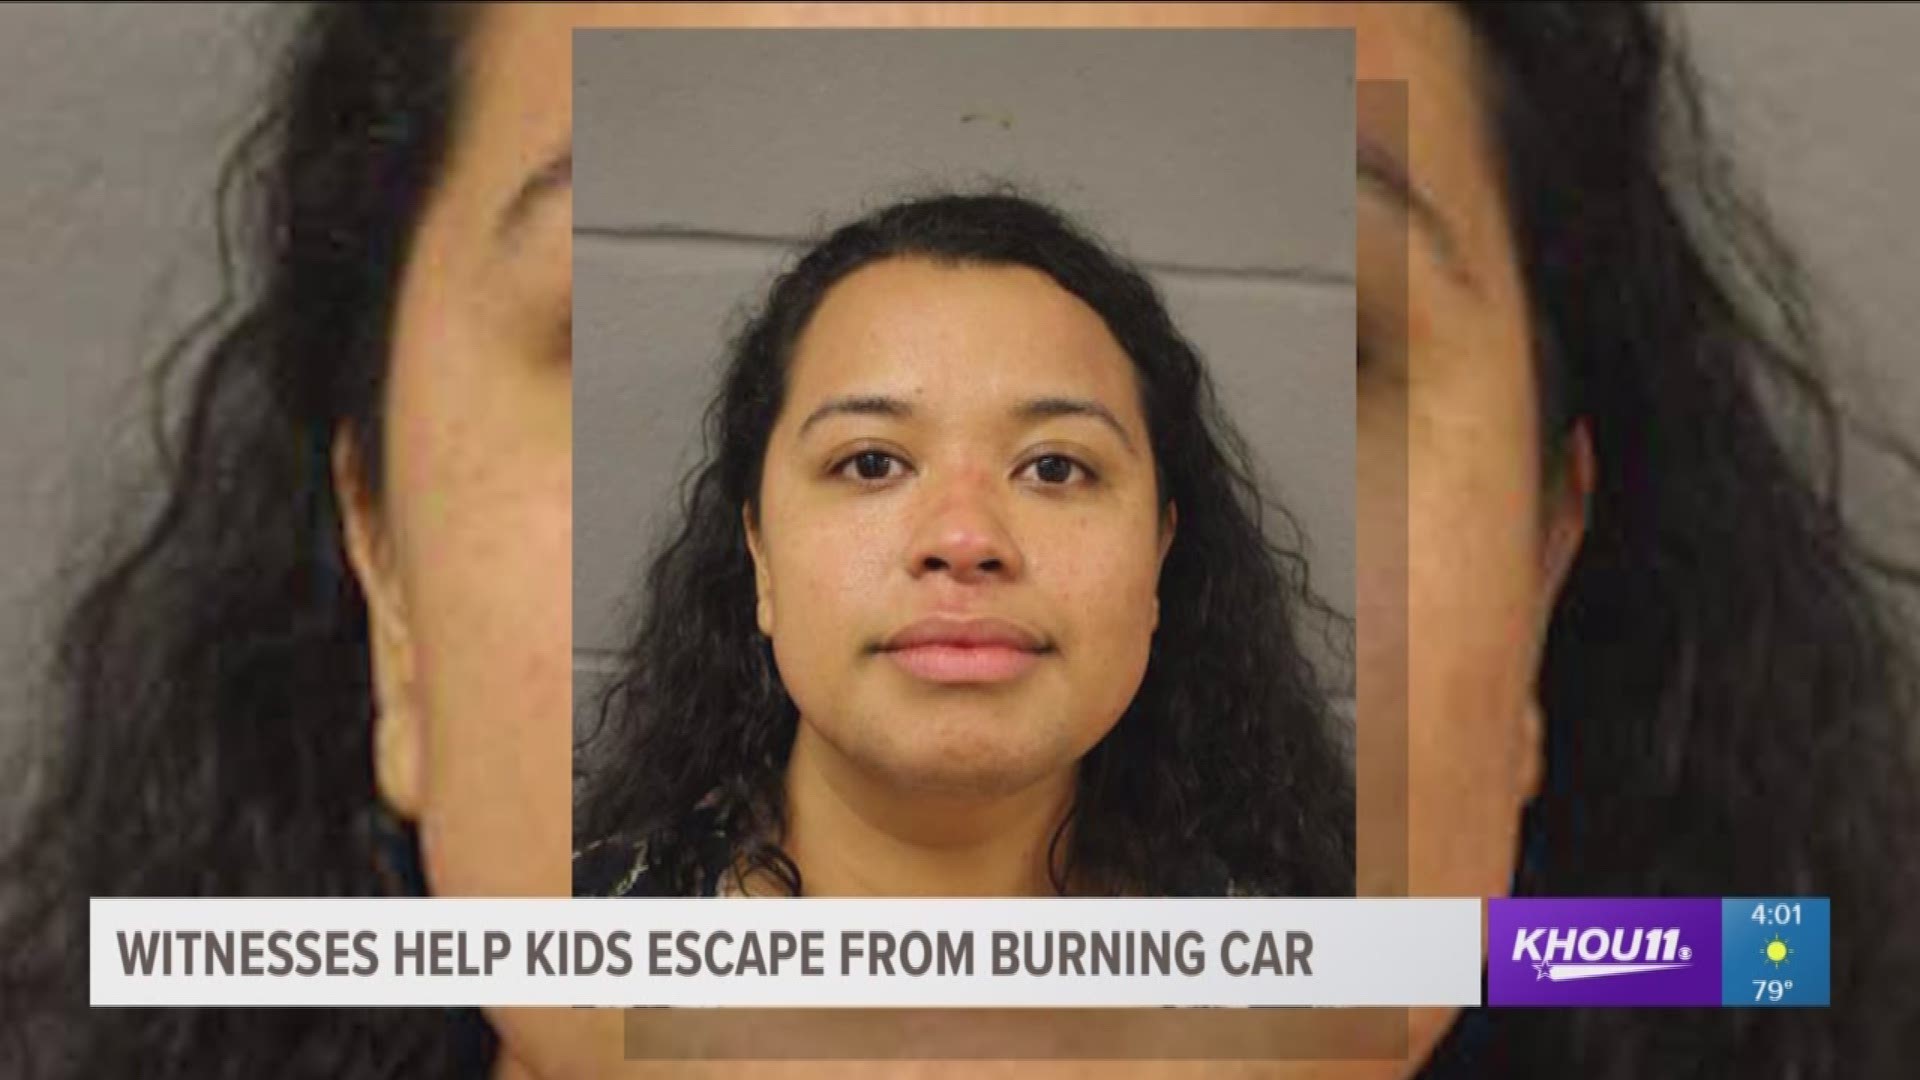 Police say a woman told her children that "they were going to see Jesus" before she tried to burn a car with them inside.